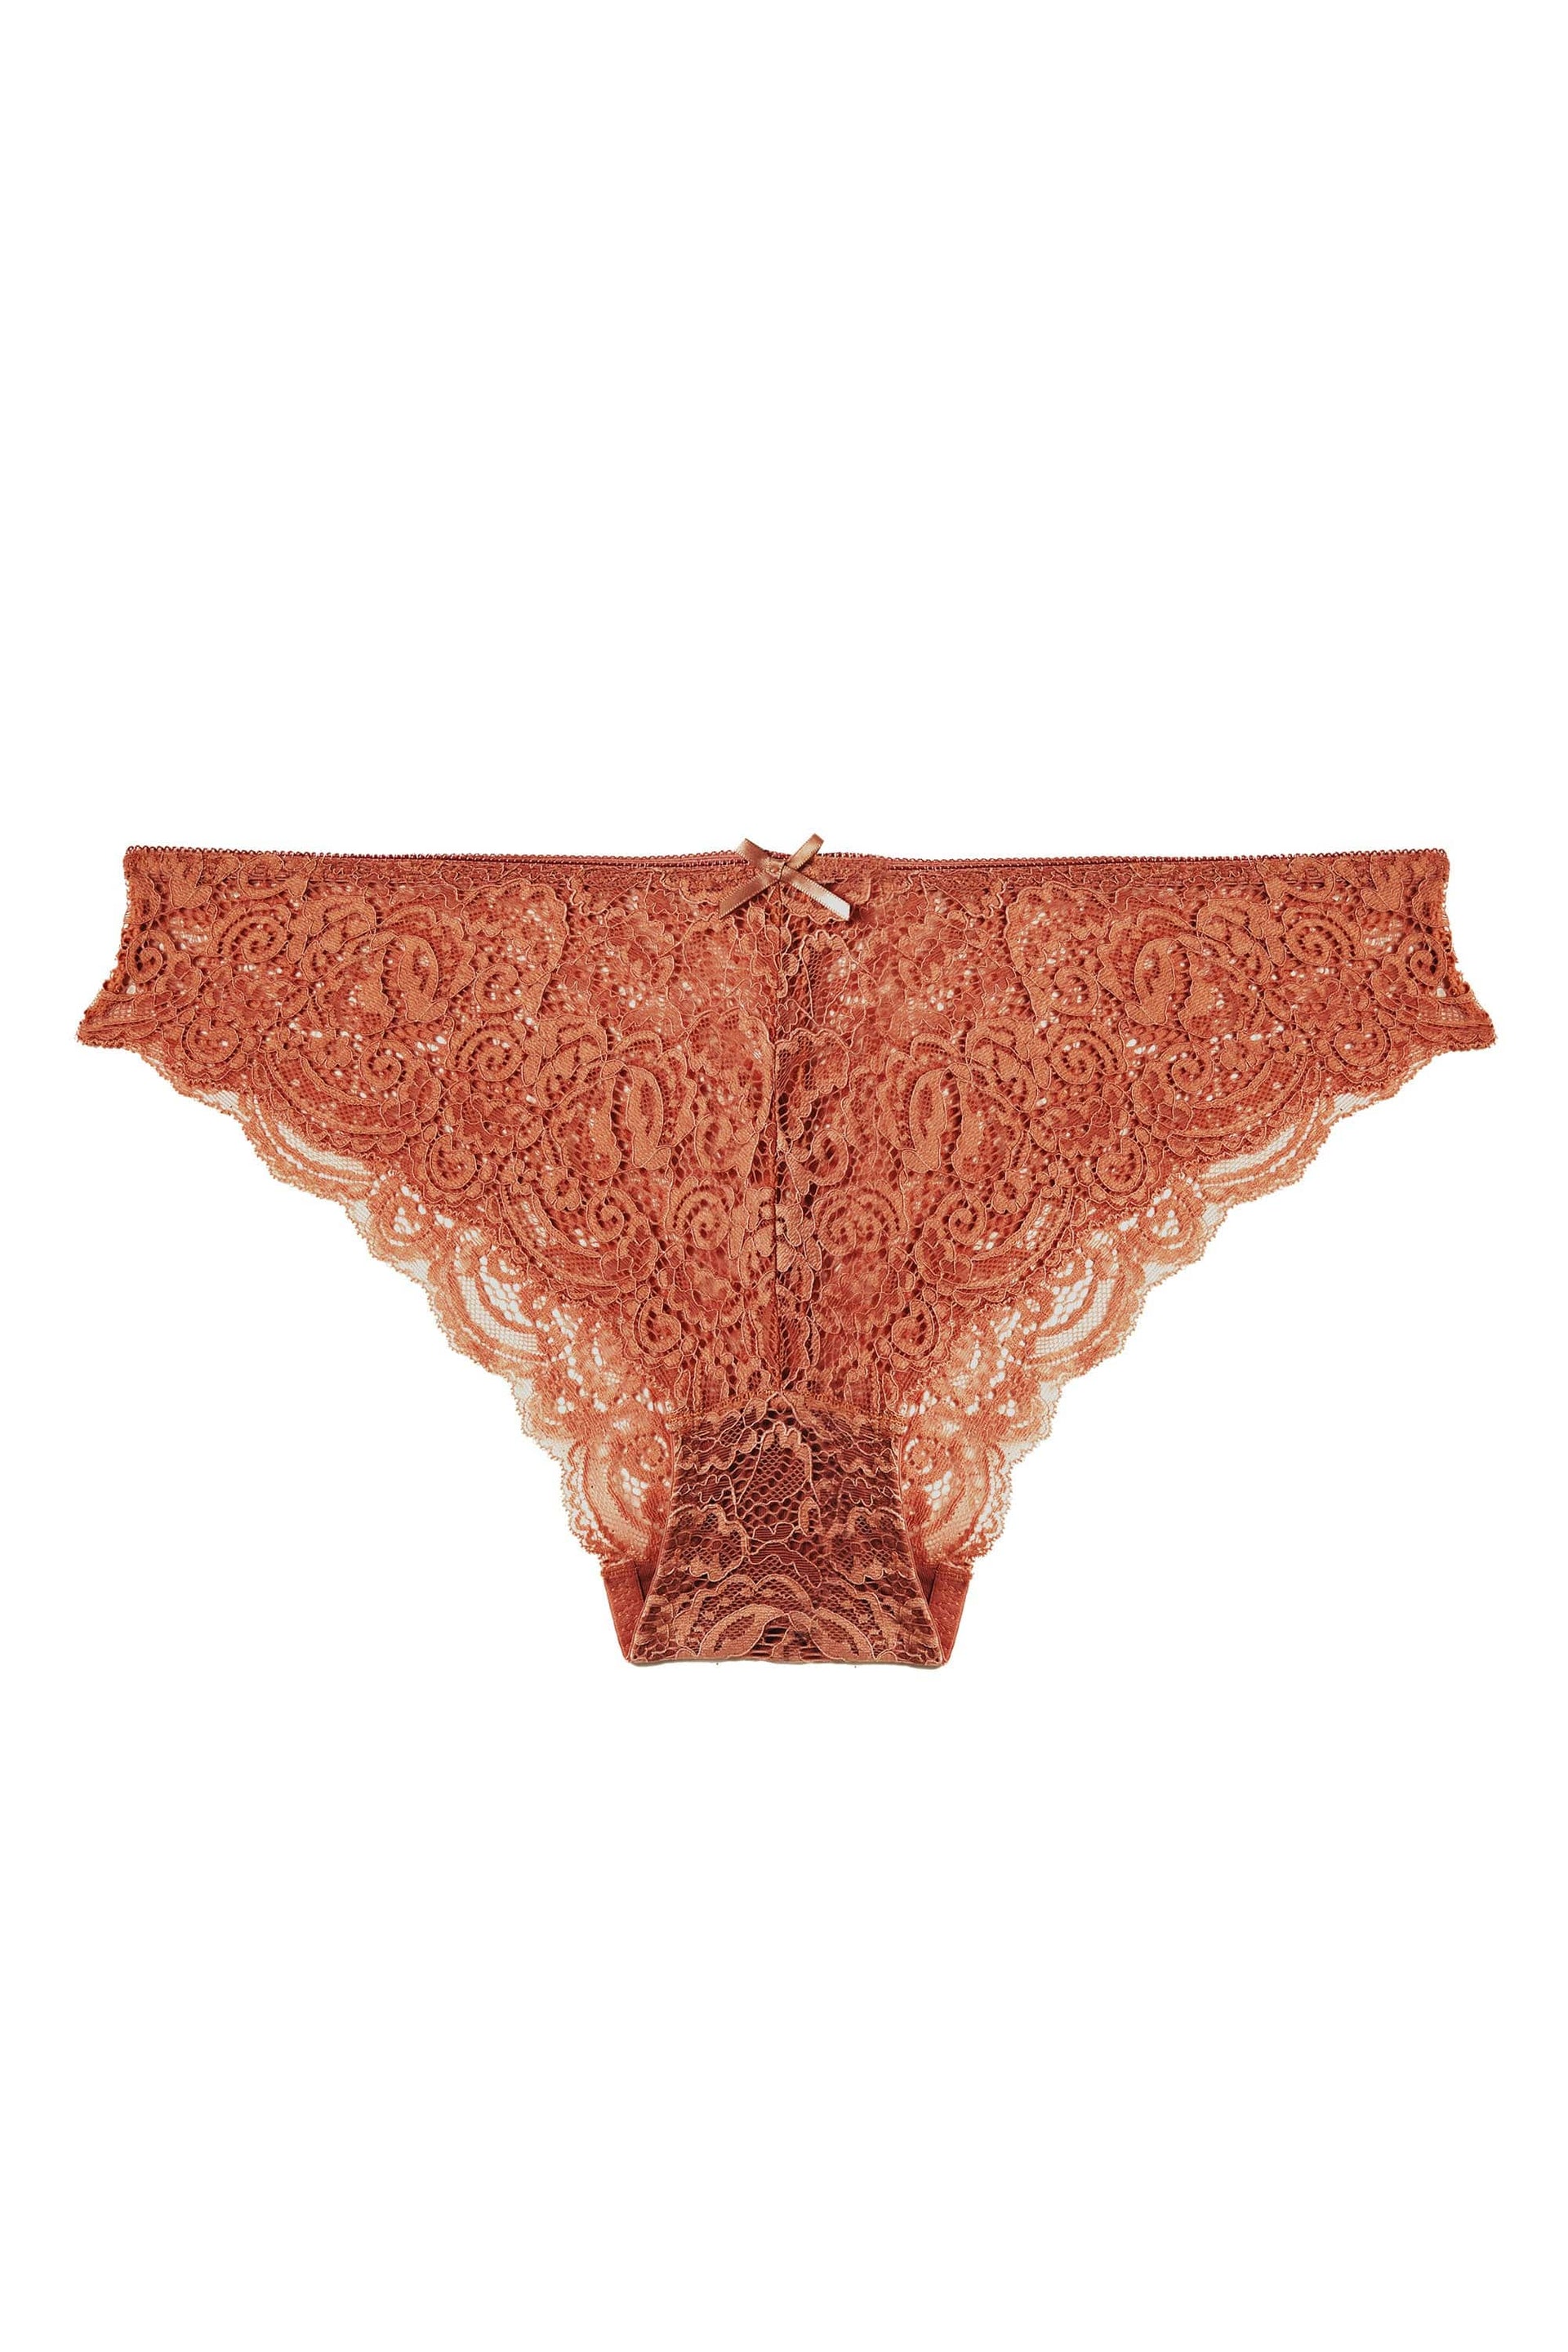 Wolf & Whistle Ariana Lace Brief